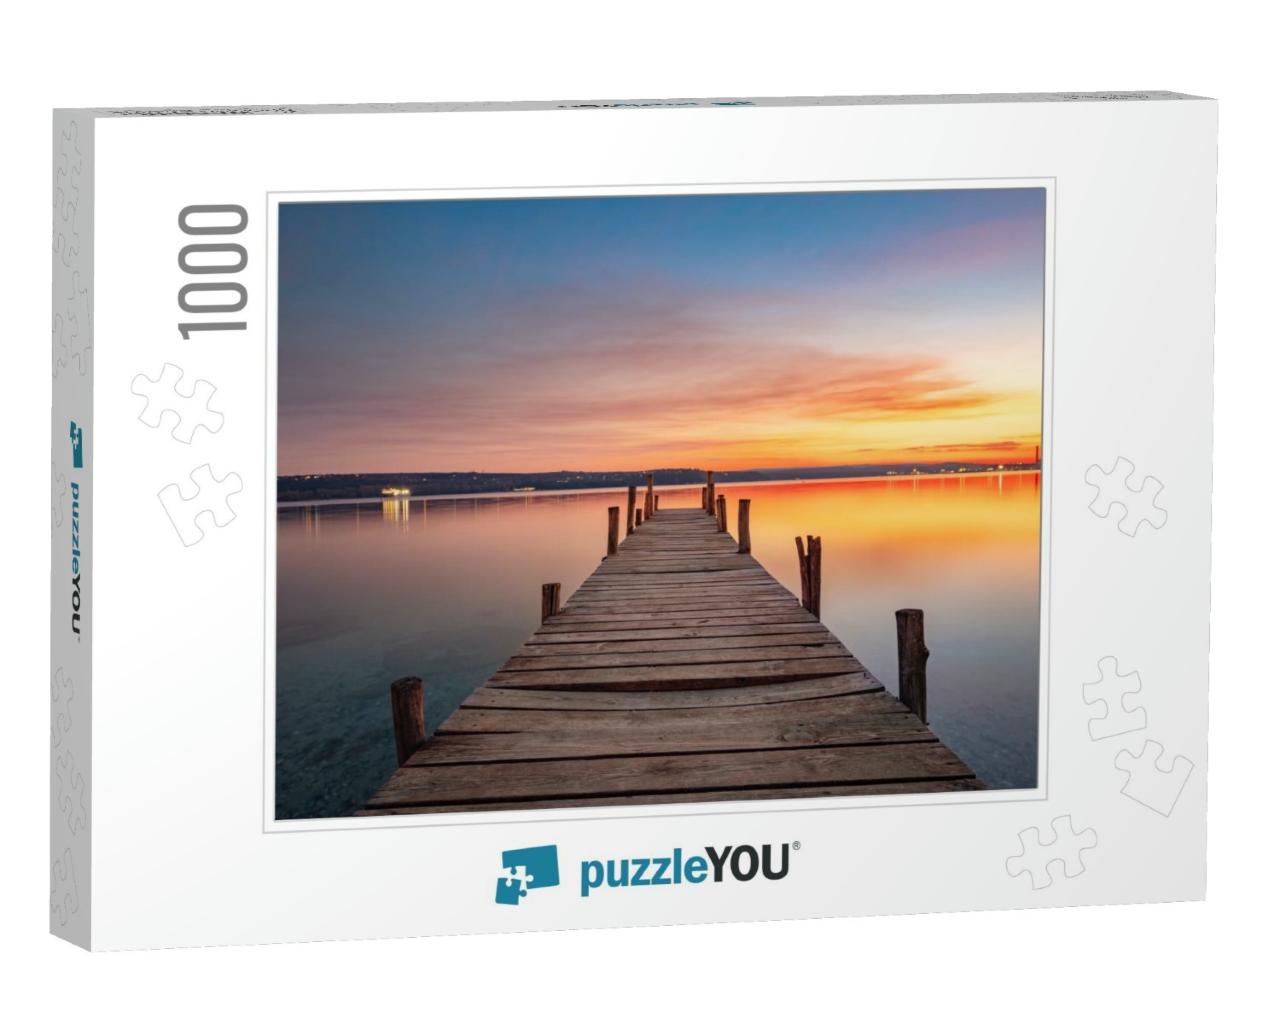 Small Dock or Wooden Pier & the Sea Lake At Sunset... Jigsaw Puzzle with 1000 pieces